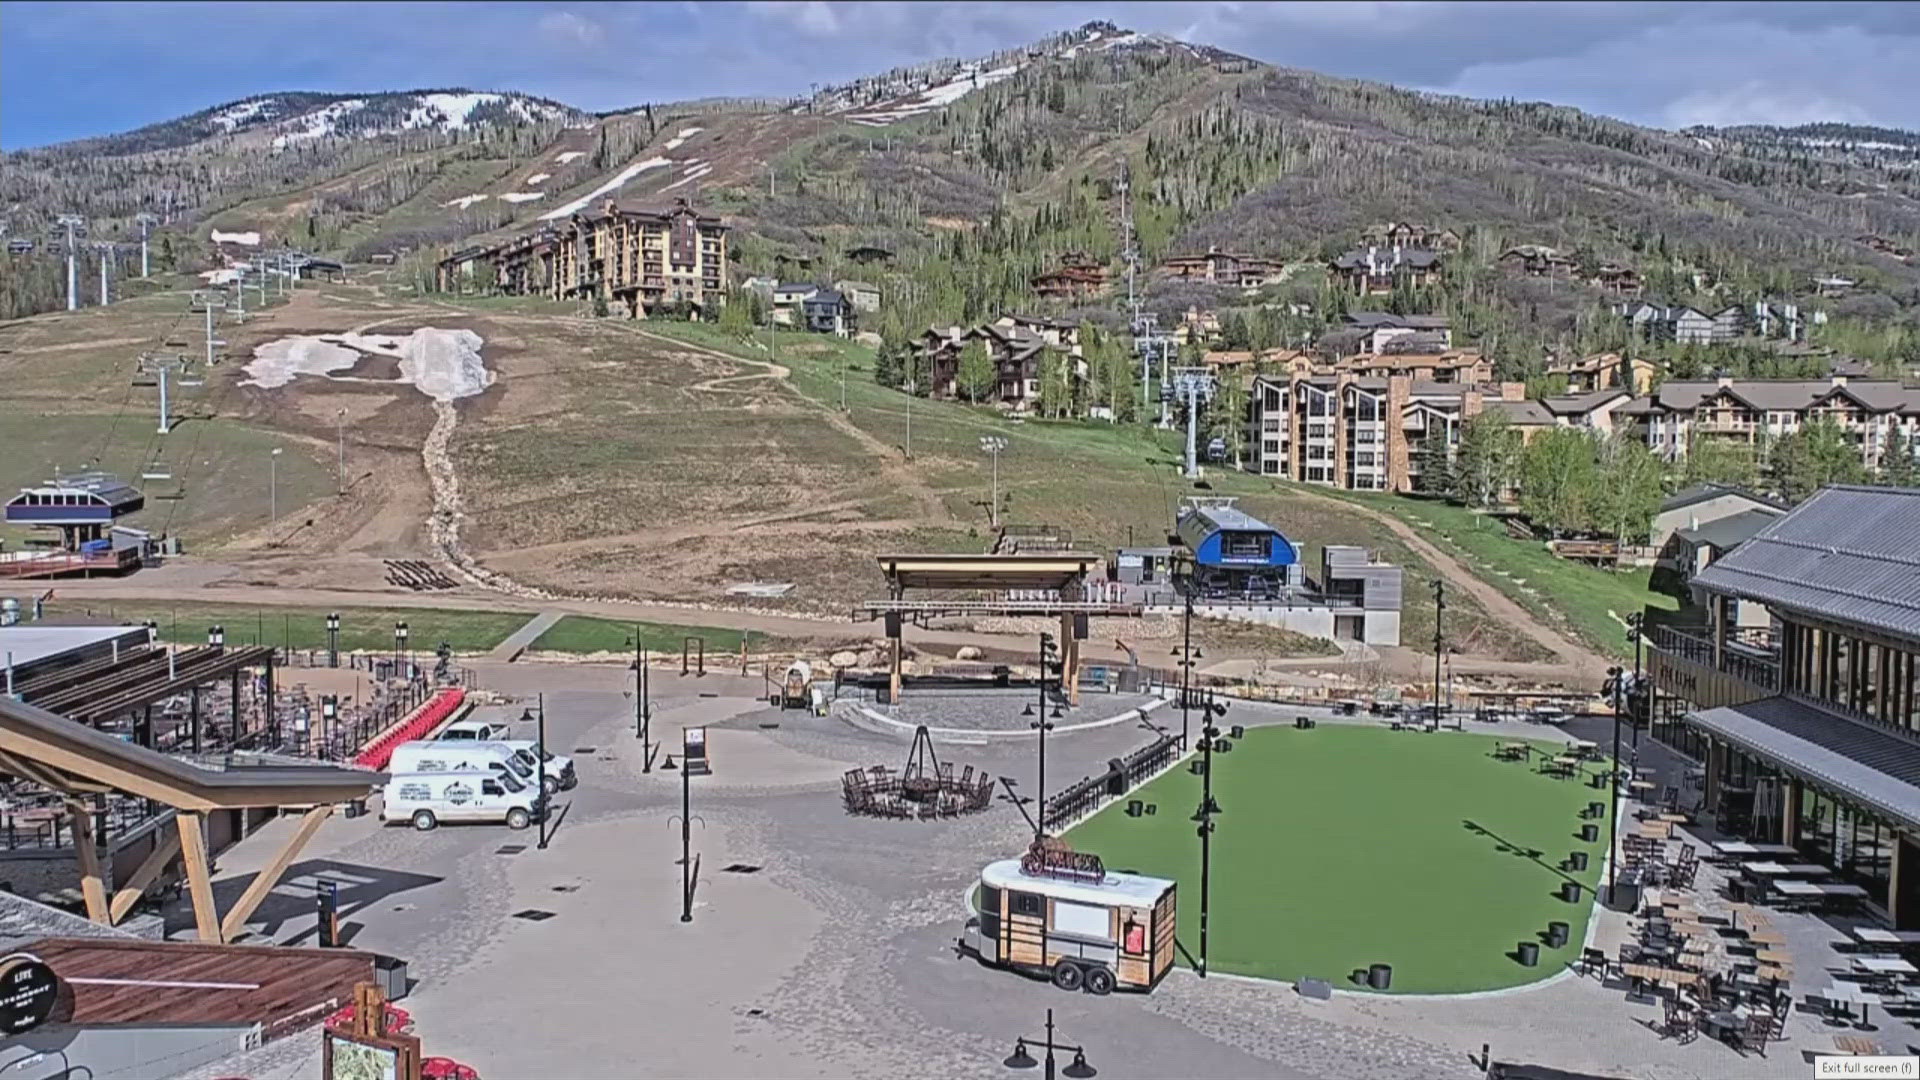 The bear attack happened near Steamboat Springs ski resort, Colorado Parks and Wildlife officials said. The person suffered minor abrasions and scrapes, CPW said.